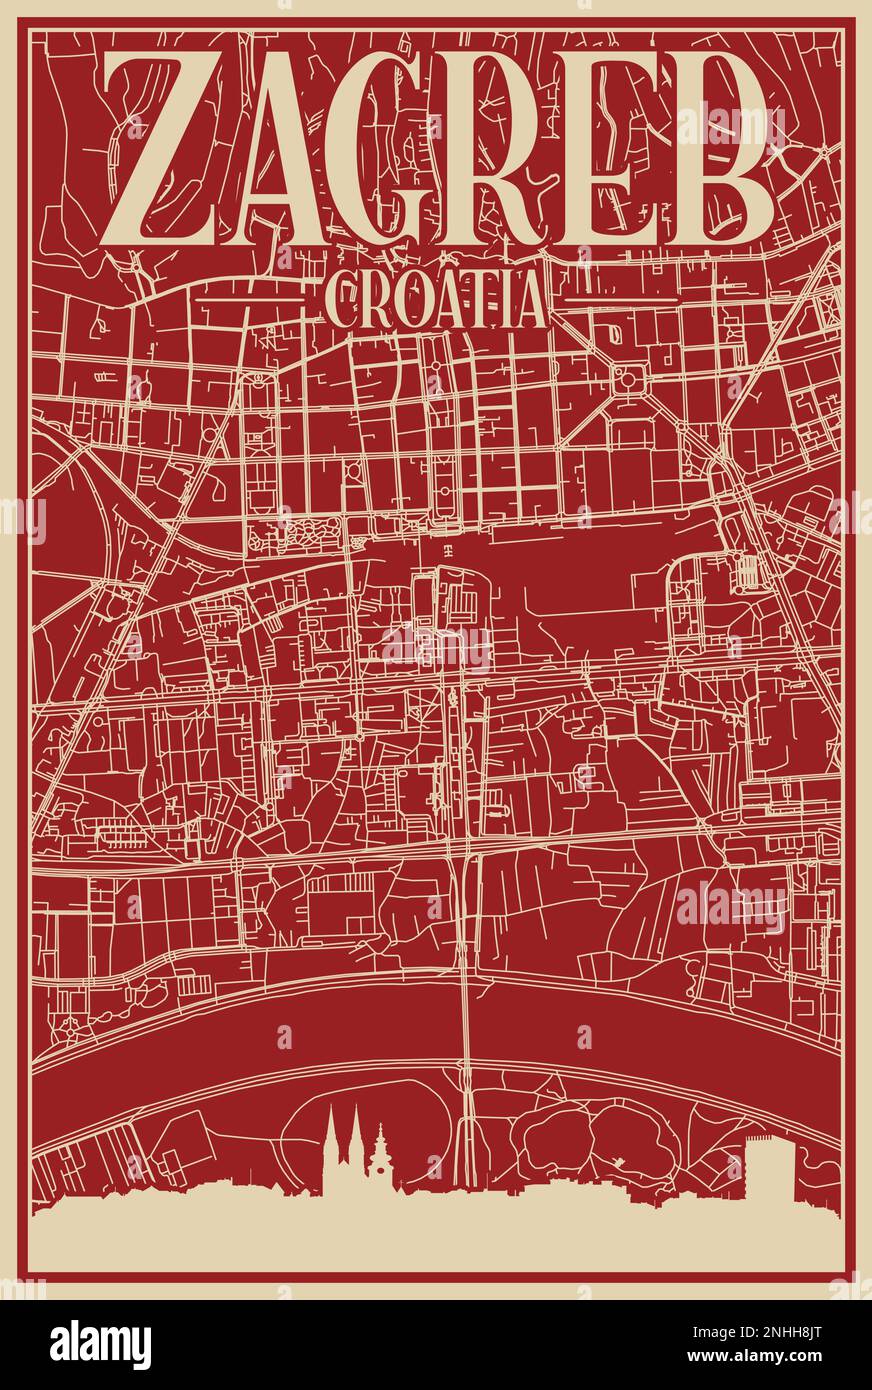 Road network poster of the downtown ZAGREB, CROATIA Stock Vector